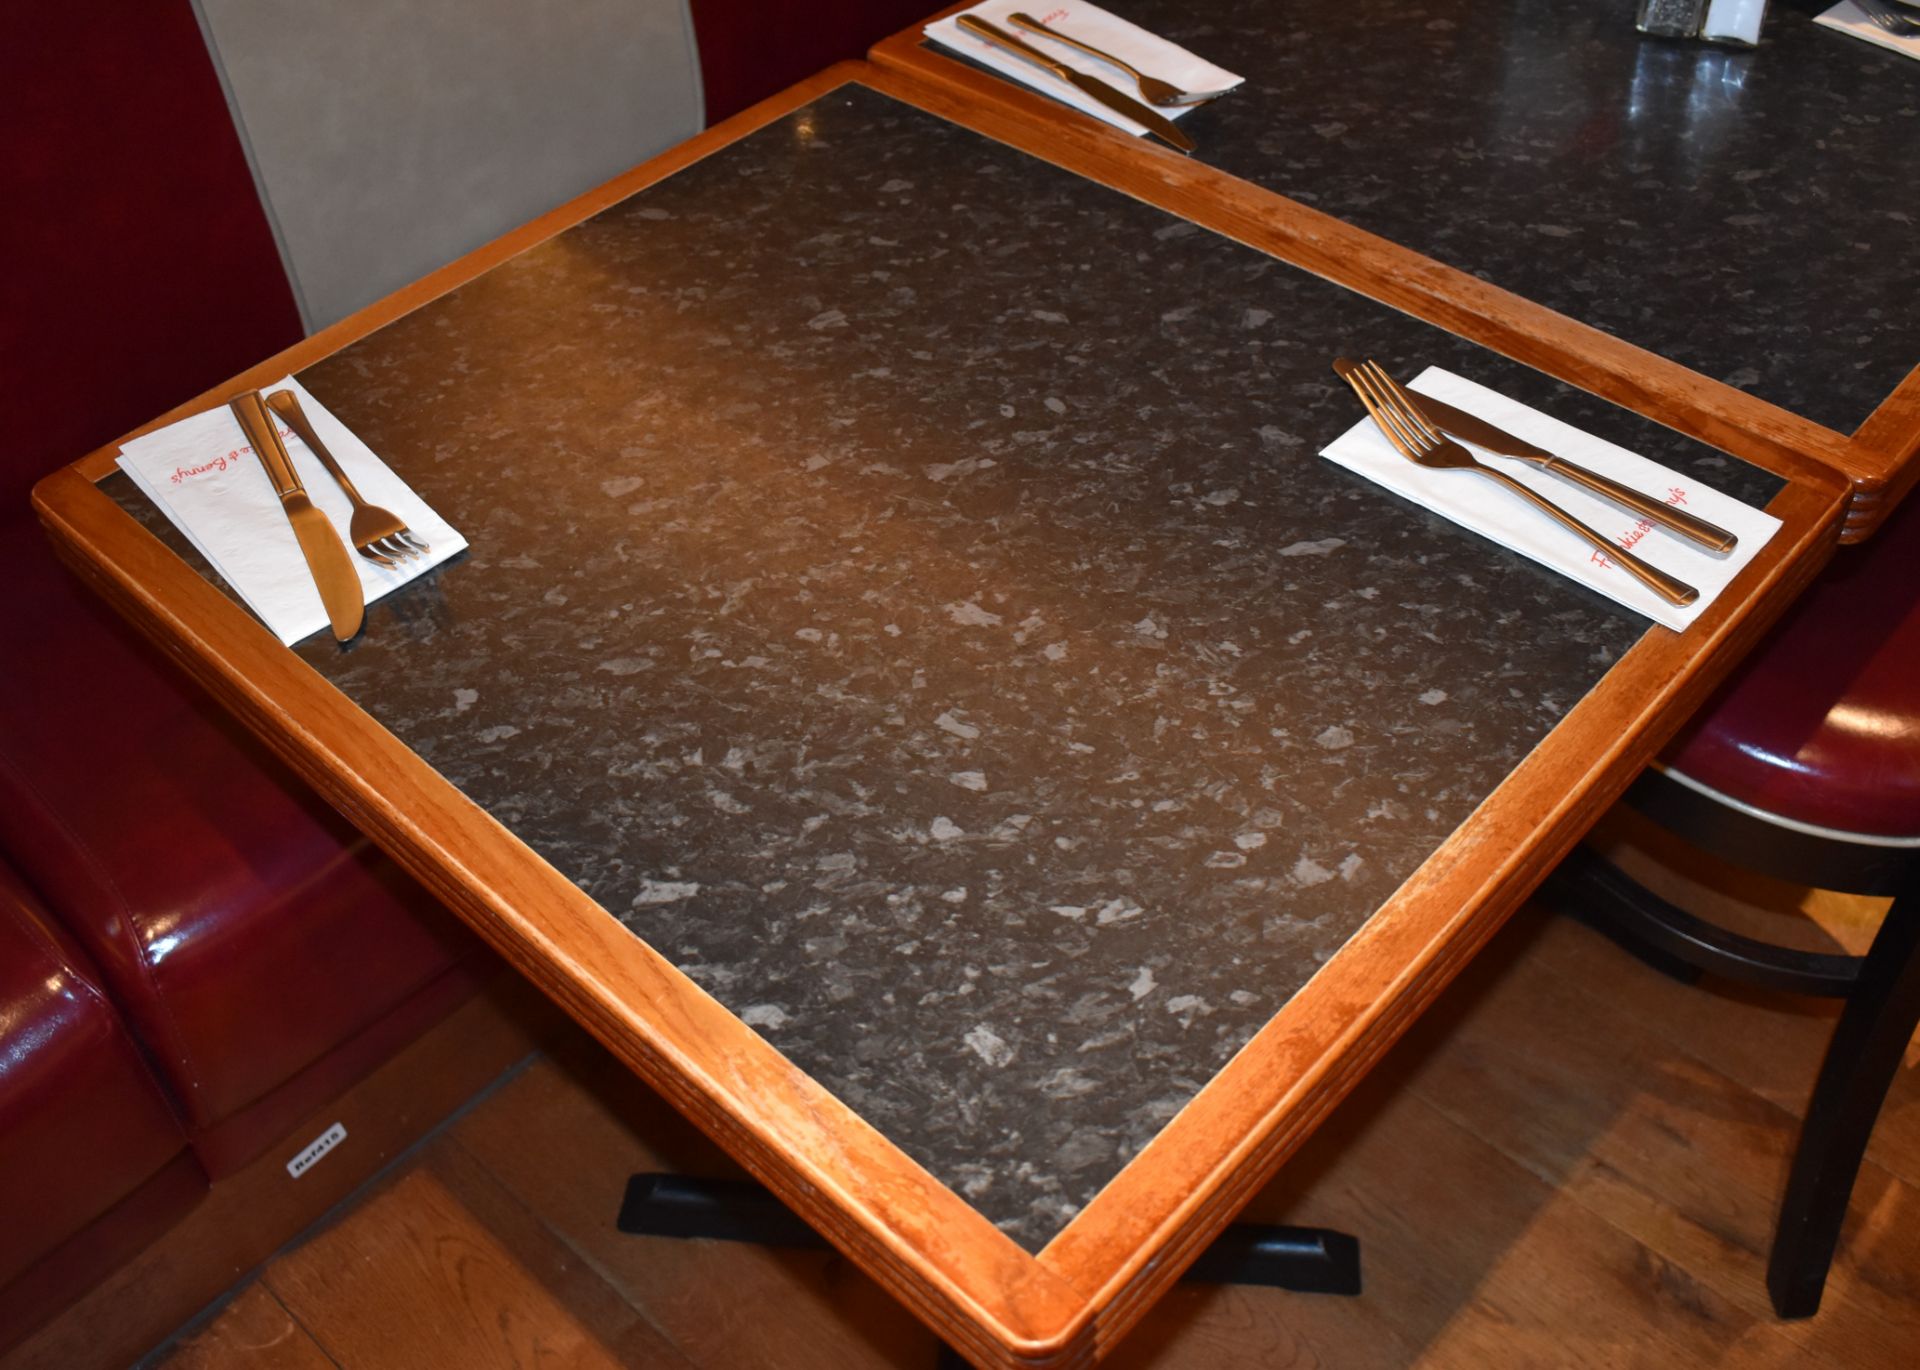 4 x Restaurant Bistro Tables With Granite Effect Tops and Cast Iron Bases - From American Italian - Image 7 of 7